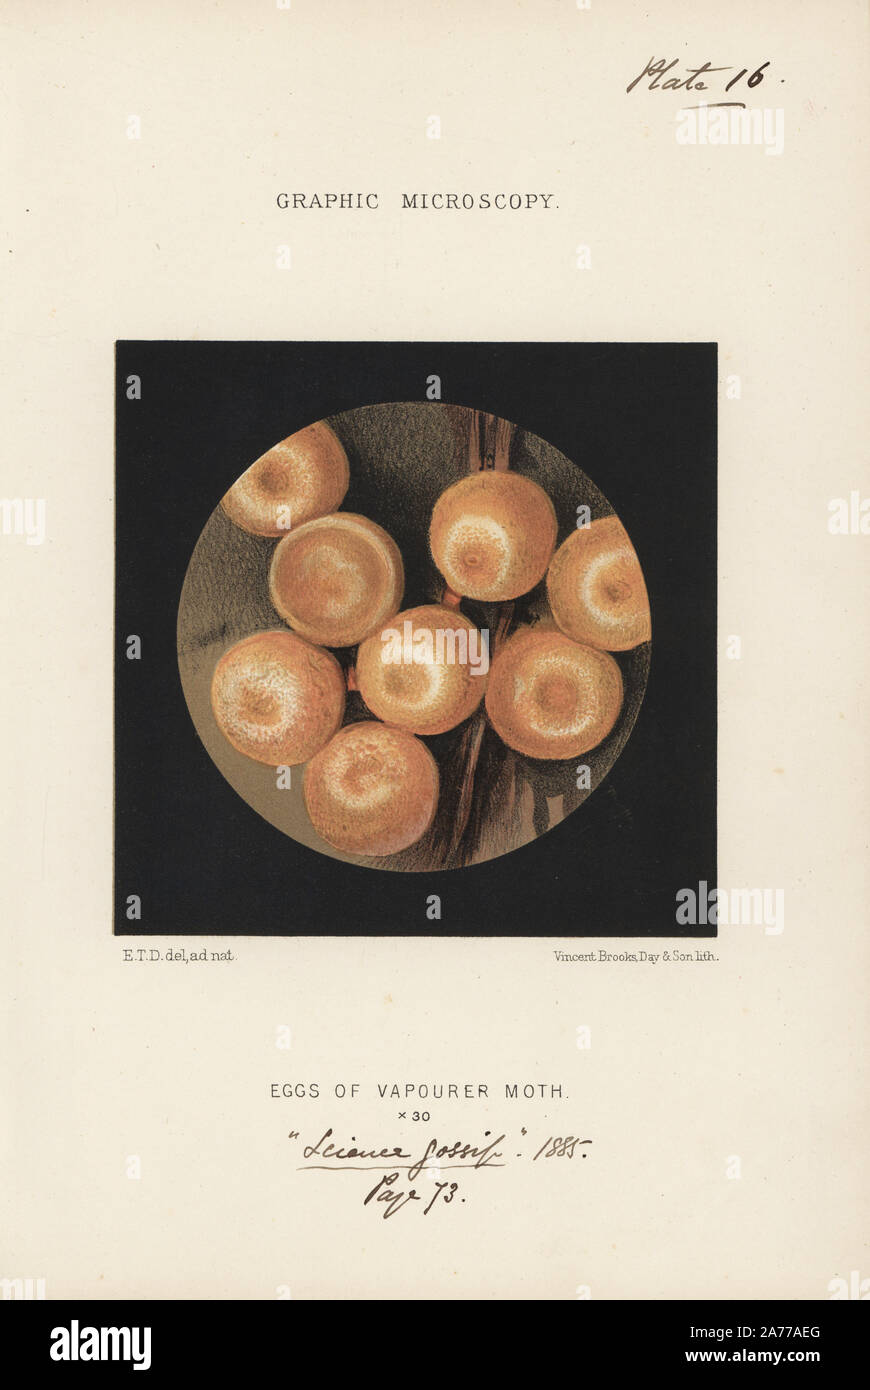 Eggs of the vapourer moth, Orgyia antiqua, magnified x30. Chromolithograph after an illustration by E.T.D., lithographed by Vincent Brooks, from 'Graphic Microscopy' plates to illustrate 'Hardwicke's Science Gossip,' London, 1865-1885. Stock Photo